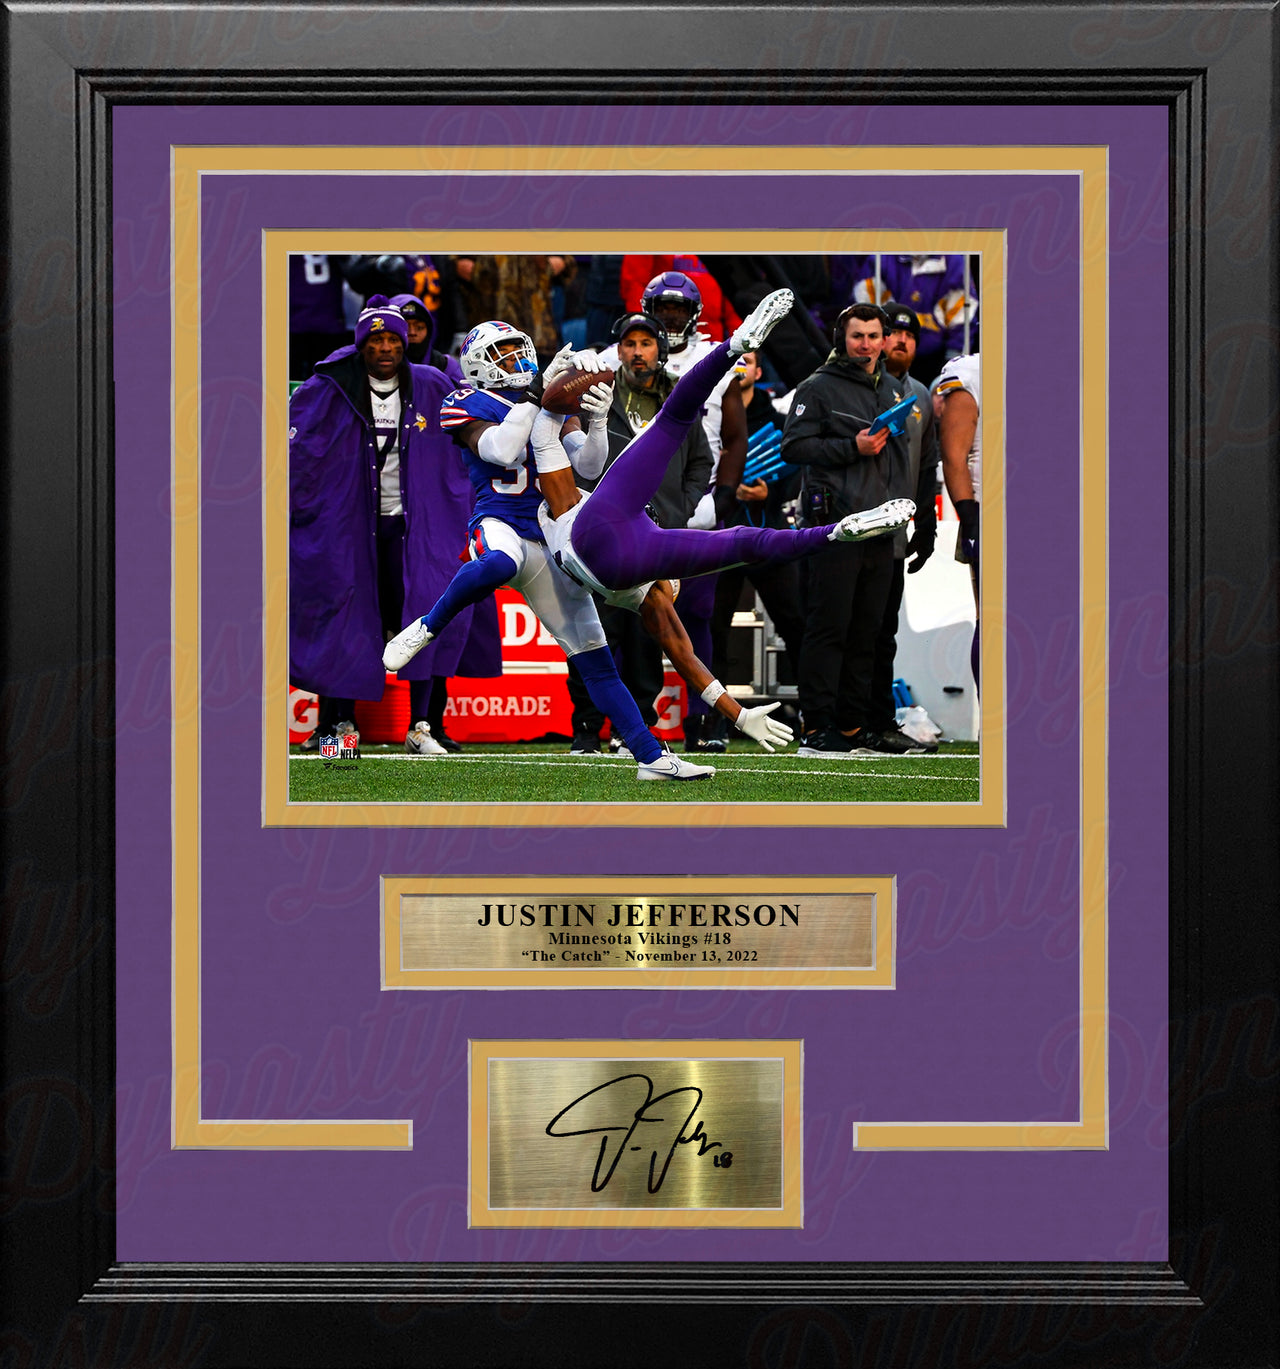 Justin Jefferson One-Handed Catch Minnesota Vikings 8"x10 Framed Photo with Engraved Autograph - Dynasty Sports & Framing 